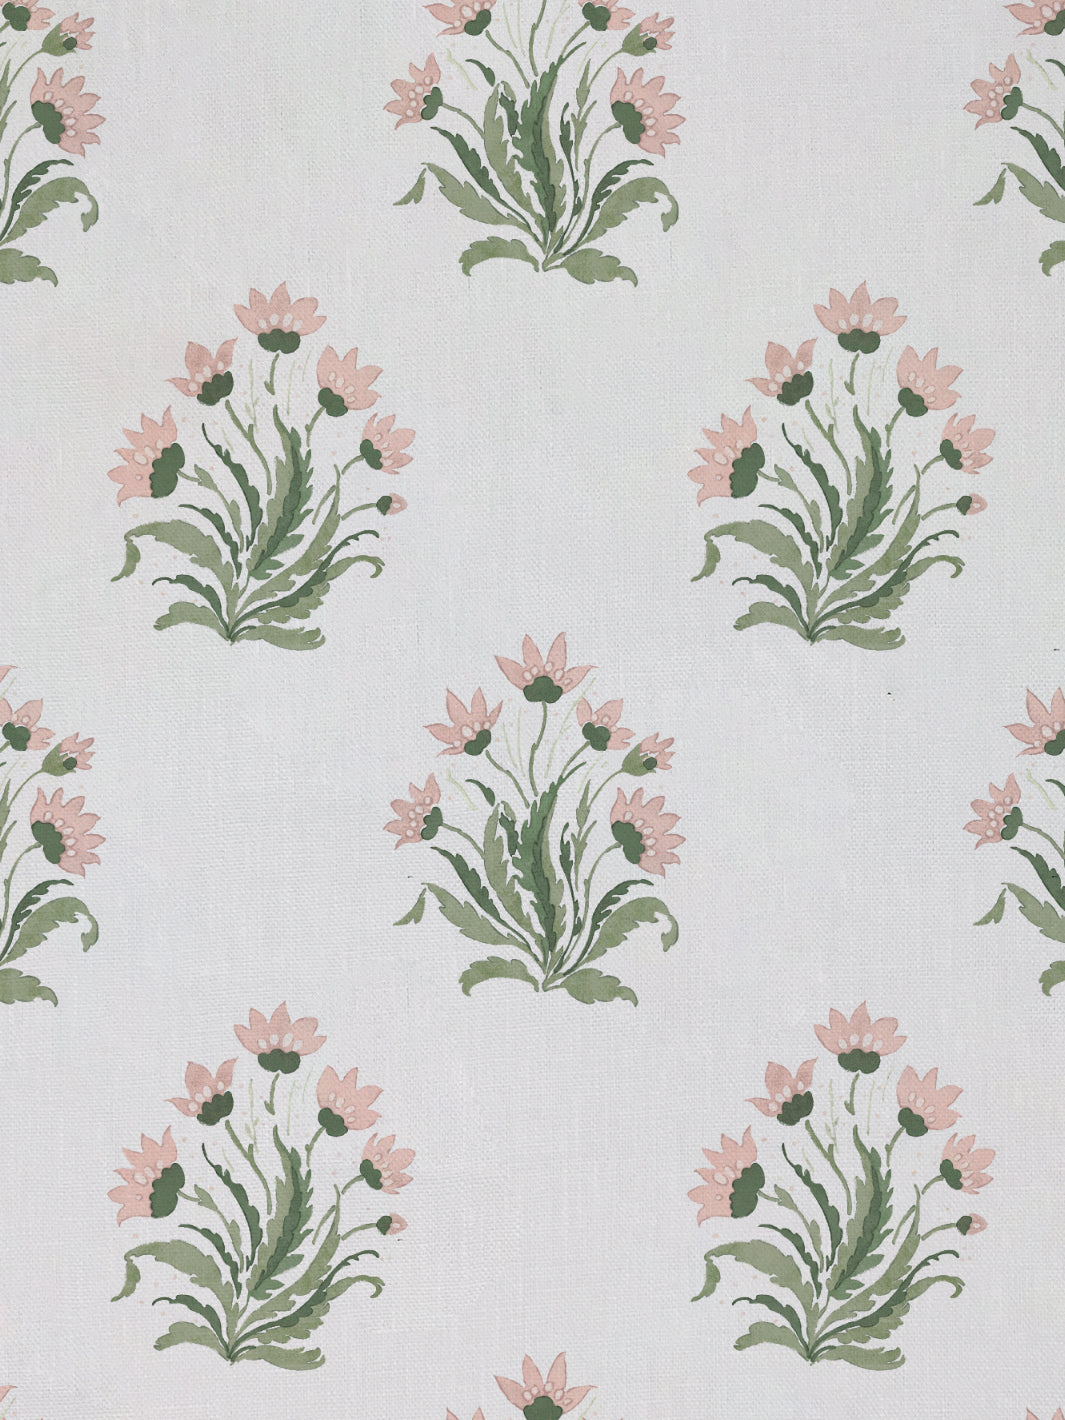 'Hillhouse Block Print Small' Linen Fabric by Nathan Turner - Pink Green